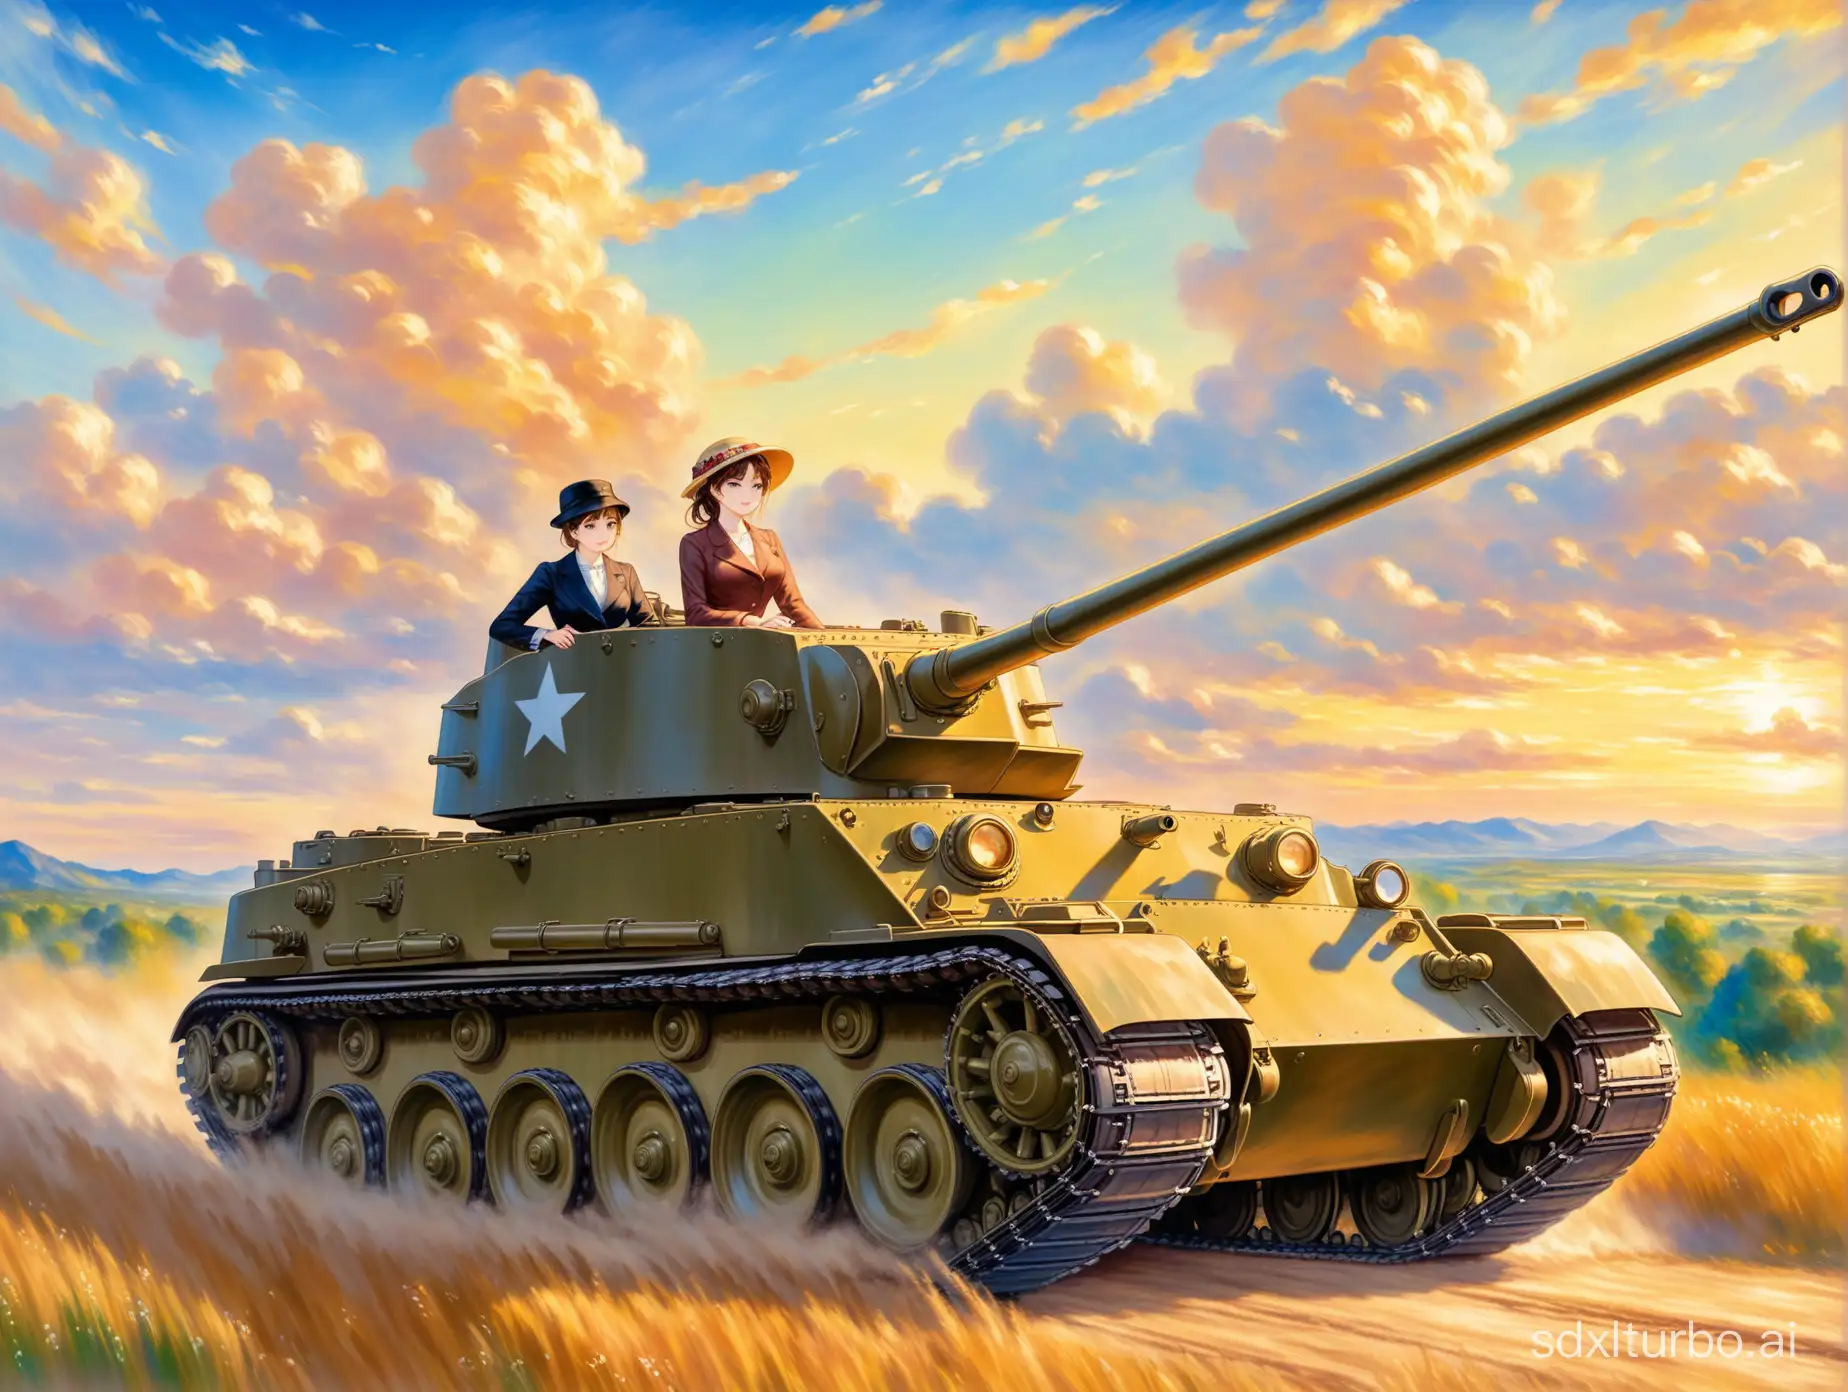 anime style majestic oil panting by Auguste Renoir, a woman in suit riding an M4 Sherman tank, beautiful scenery